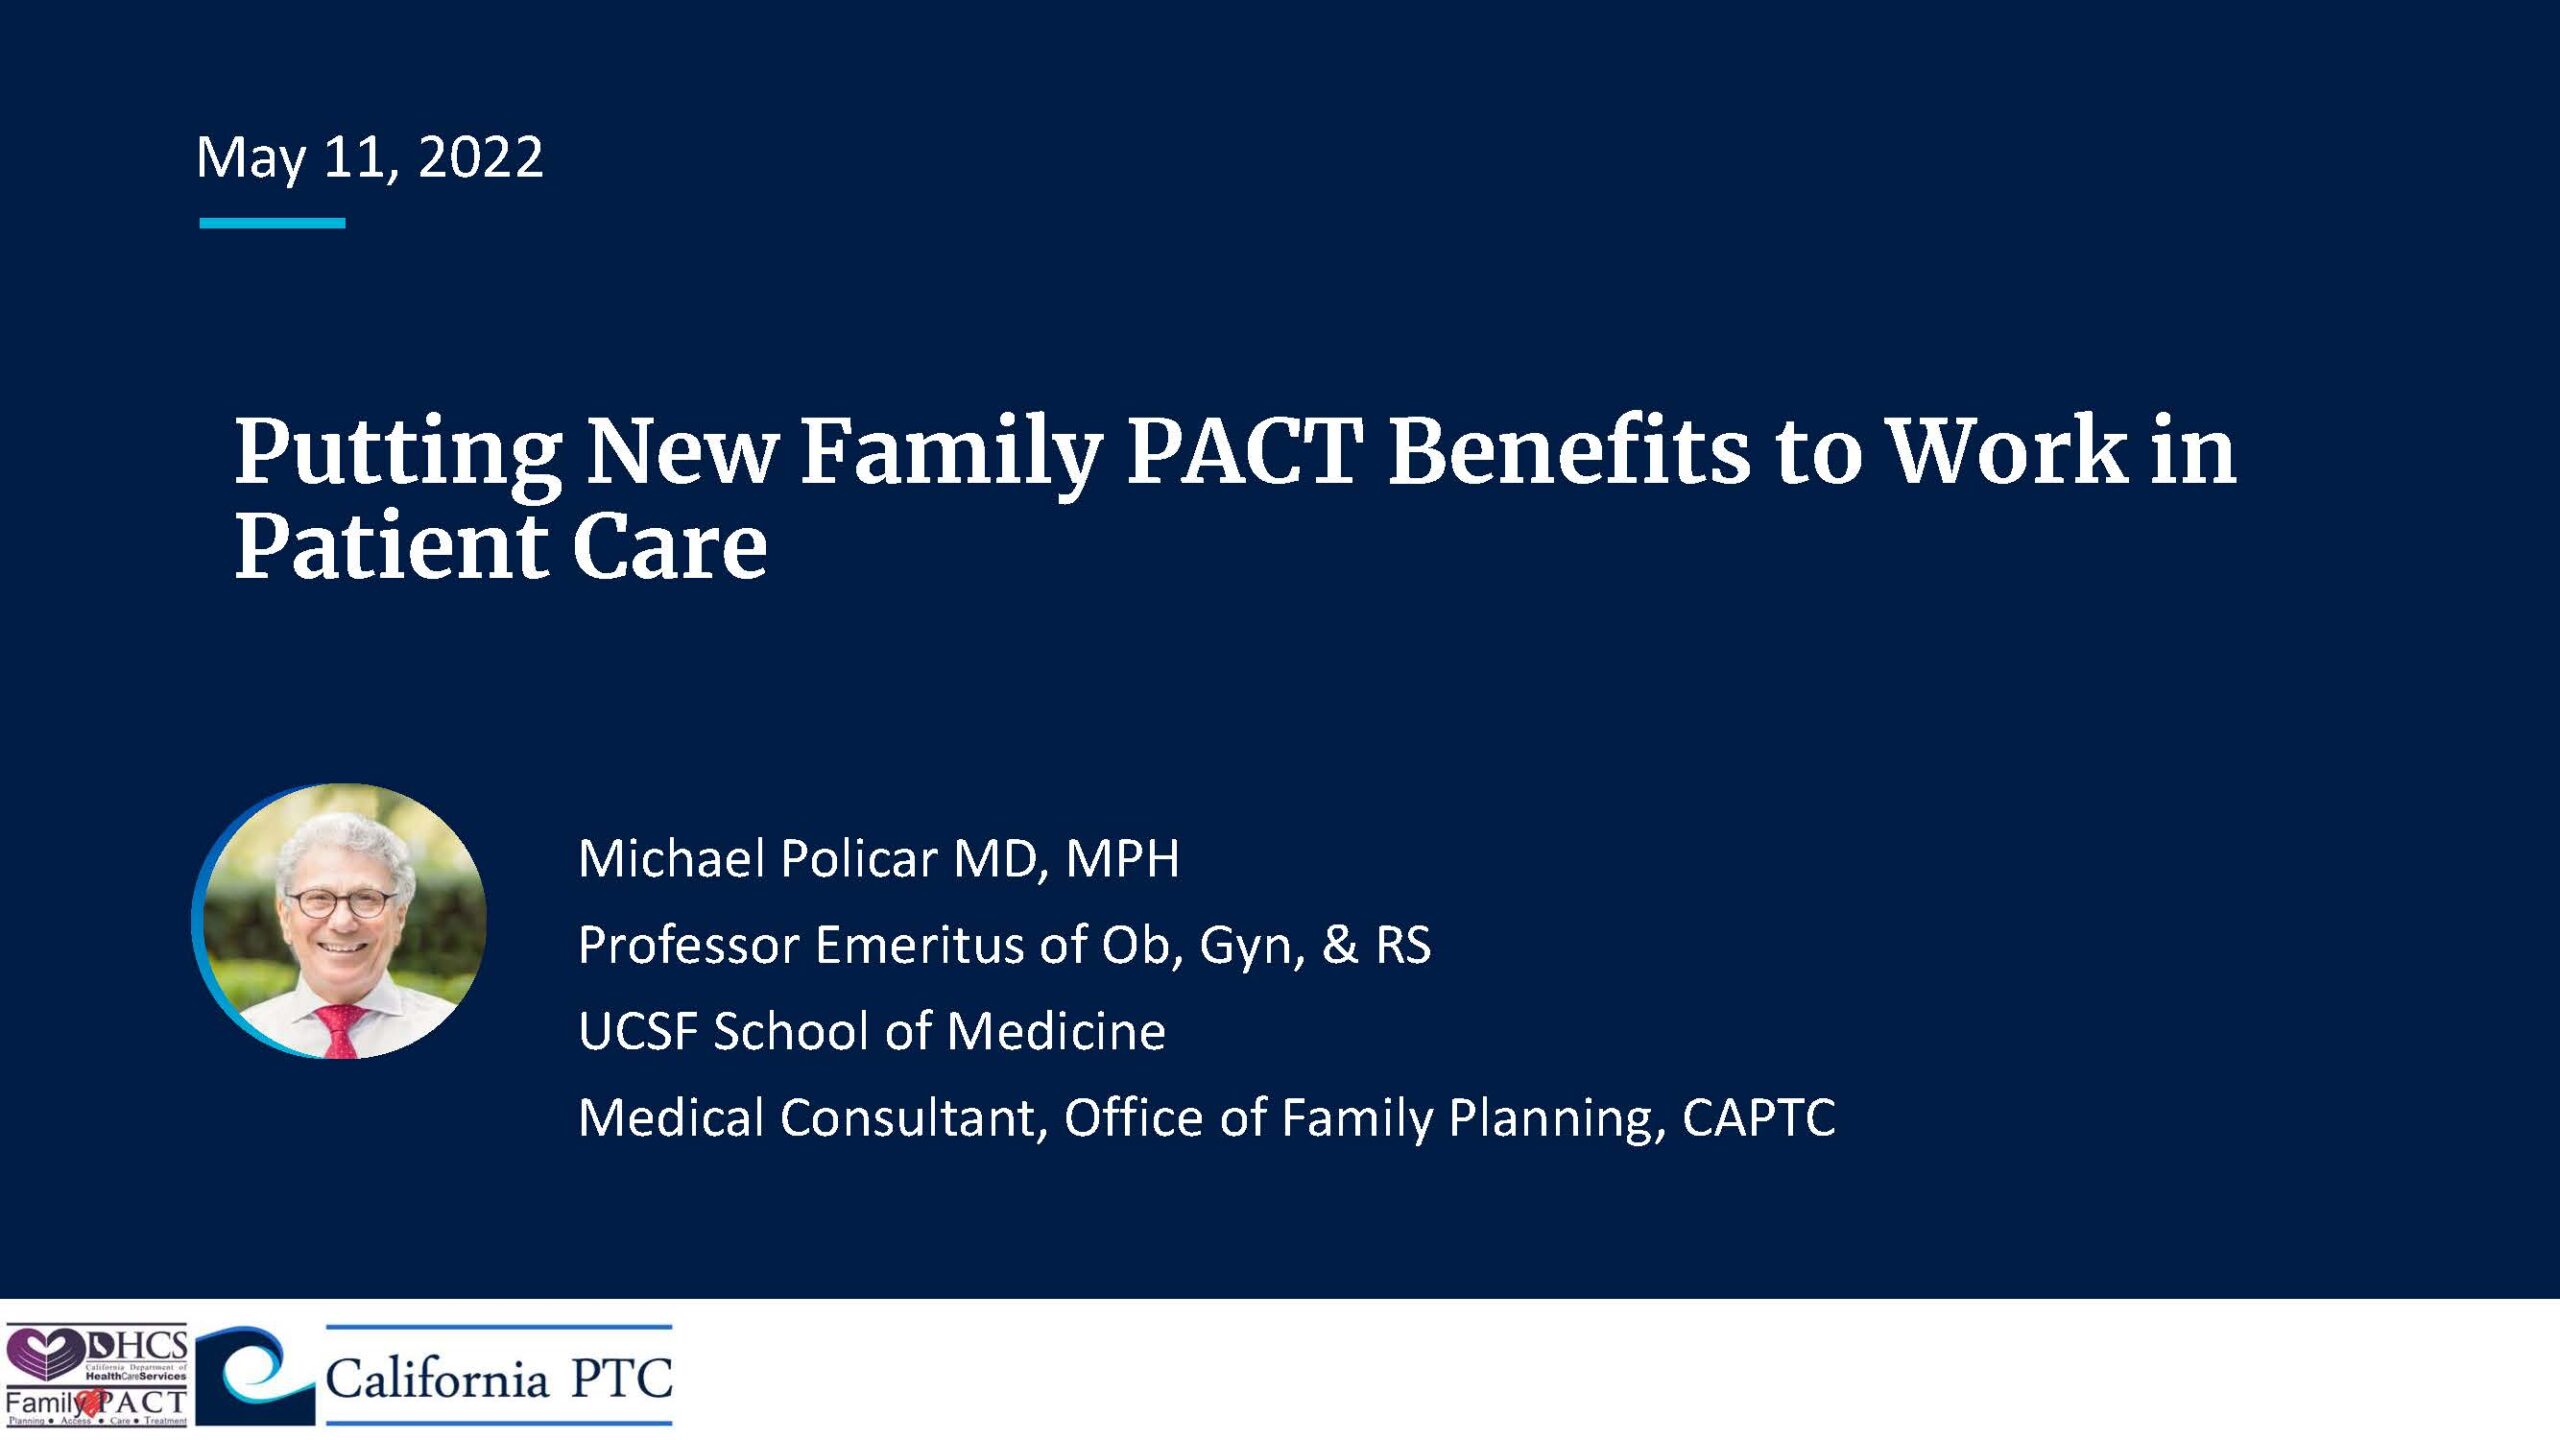 Putting New Family PACT Benefits to Work in Patient Care. Michael Policar, MD, MPH